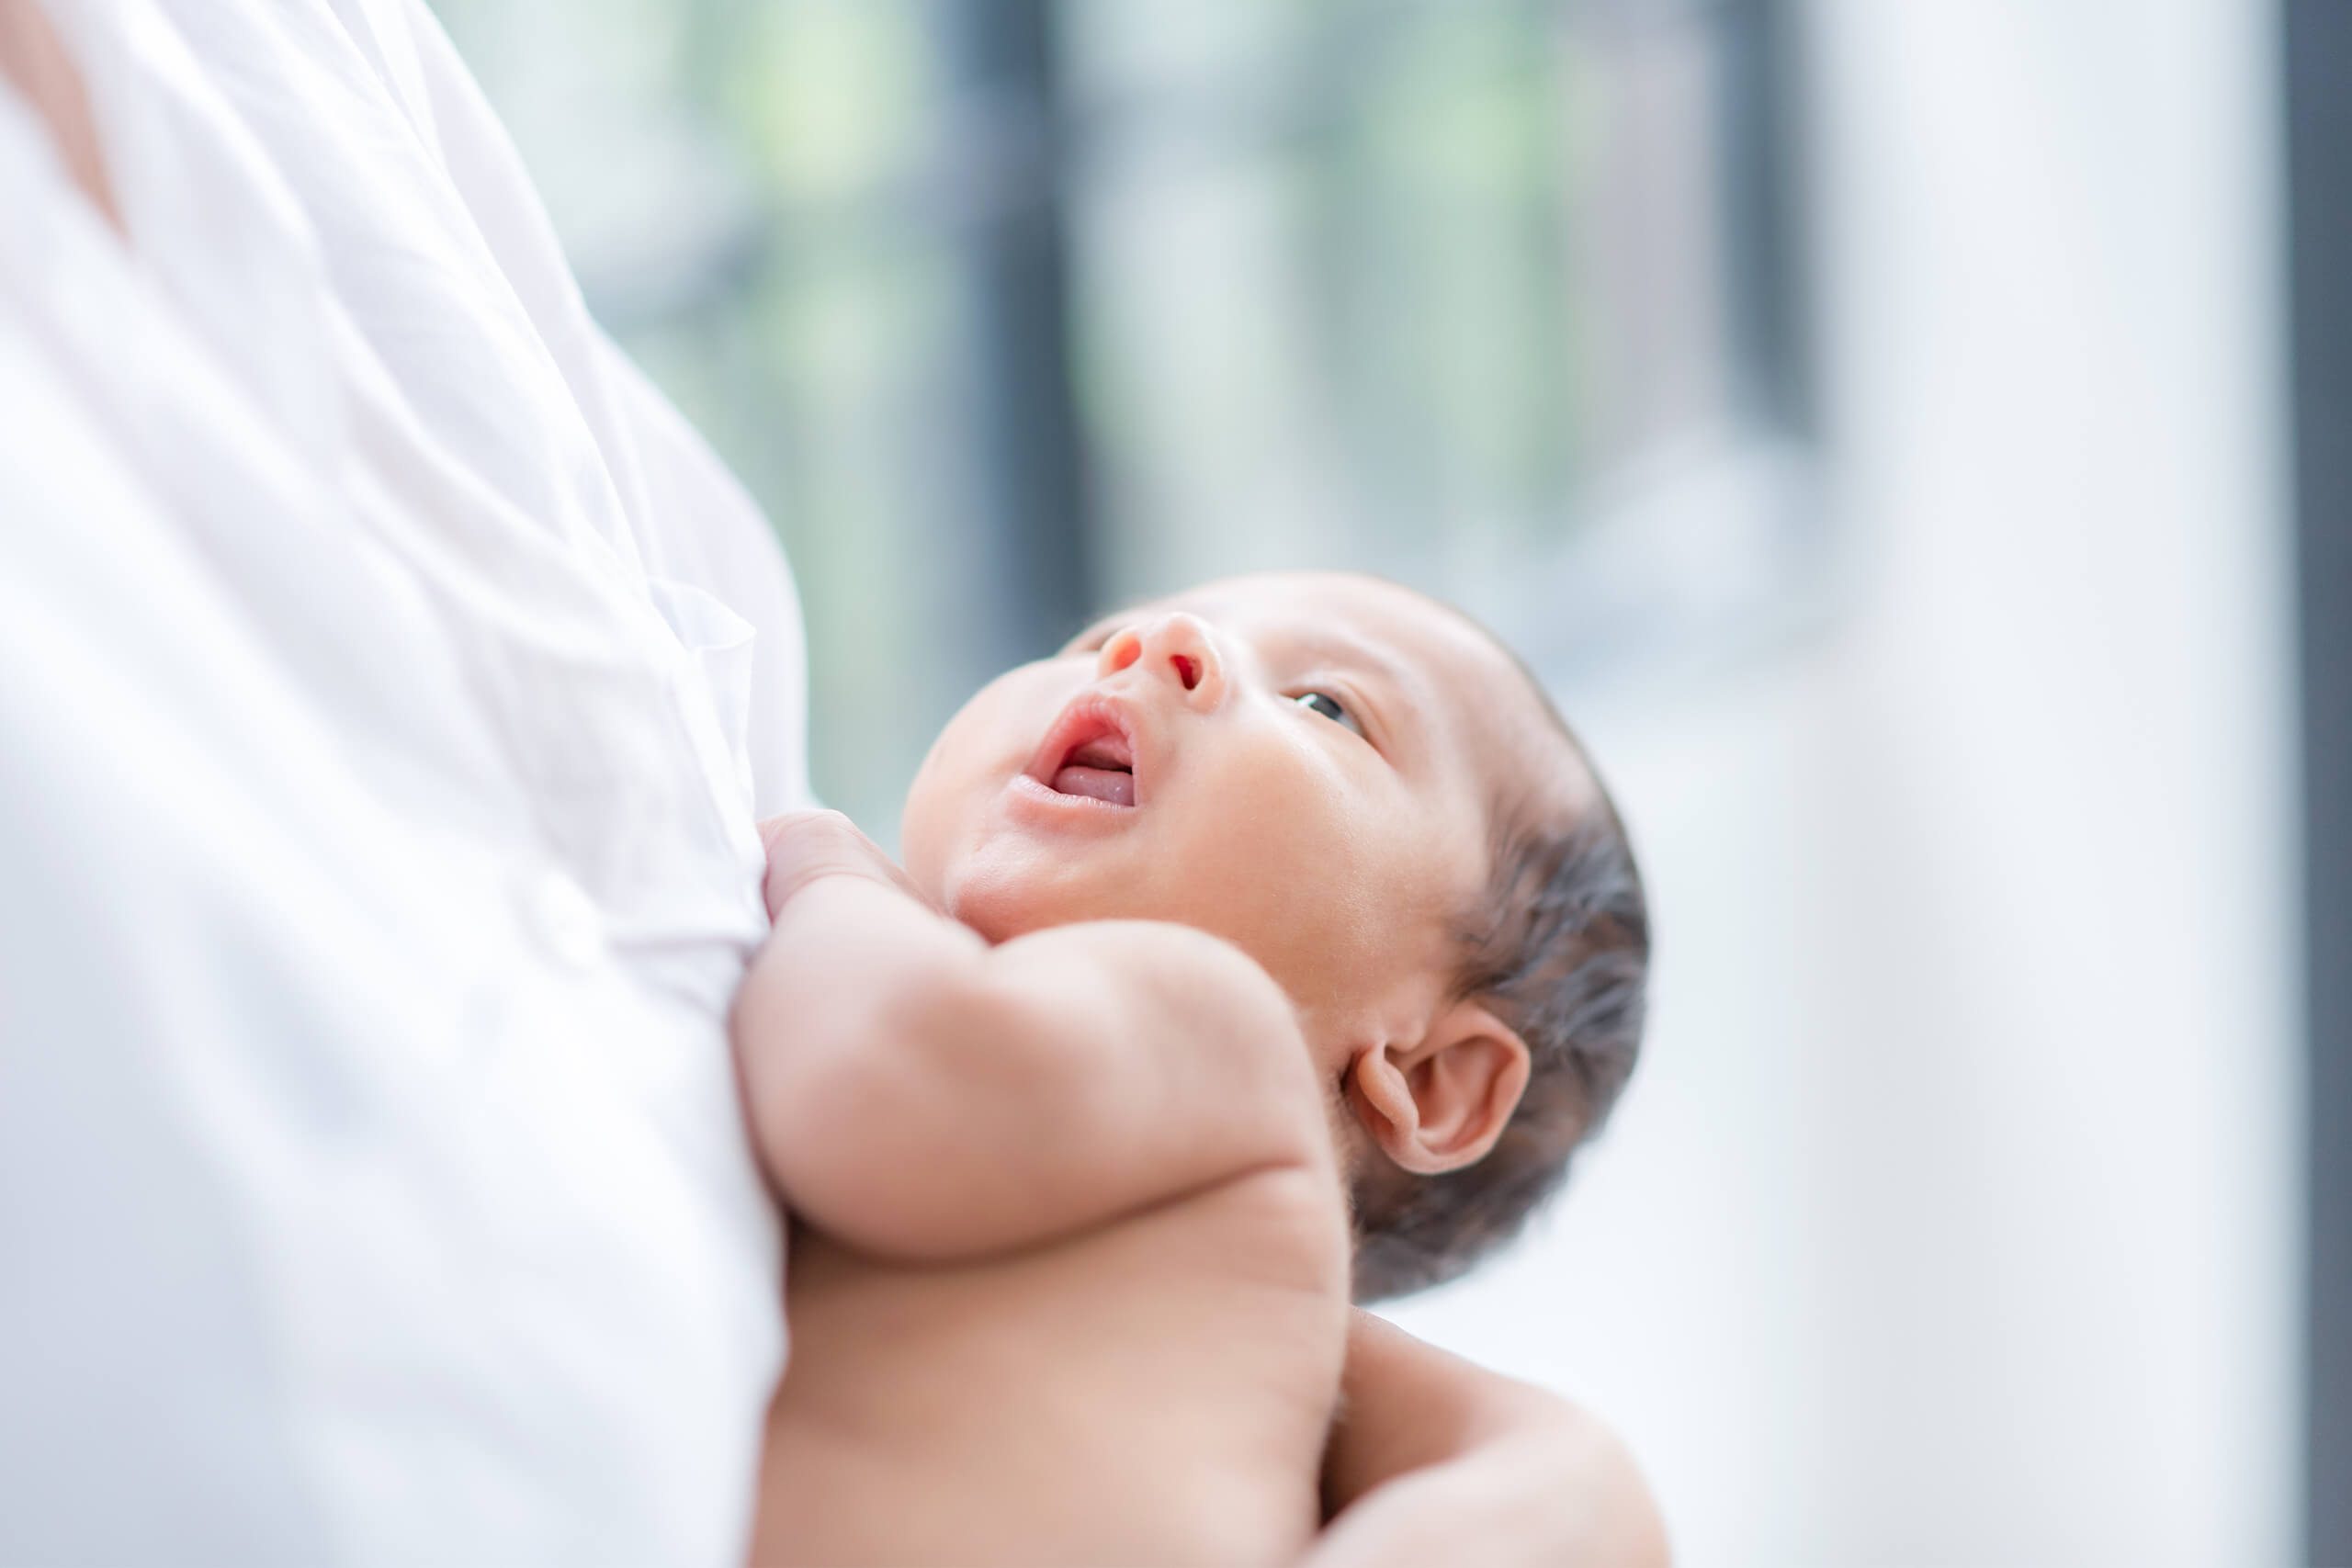 baby crying - shaken baby syndrome prevention